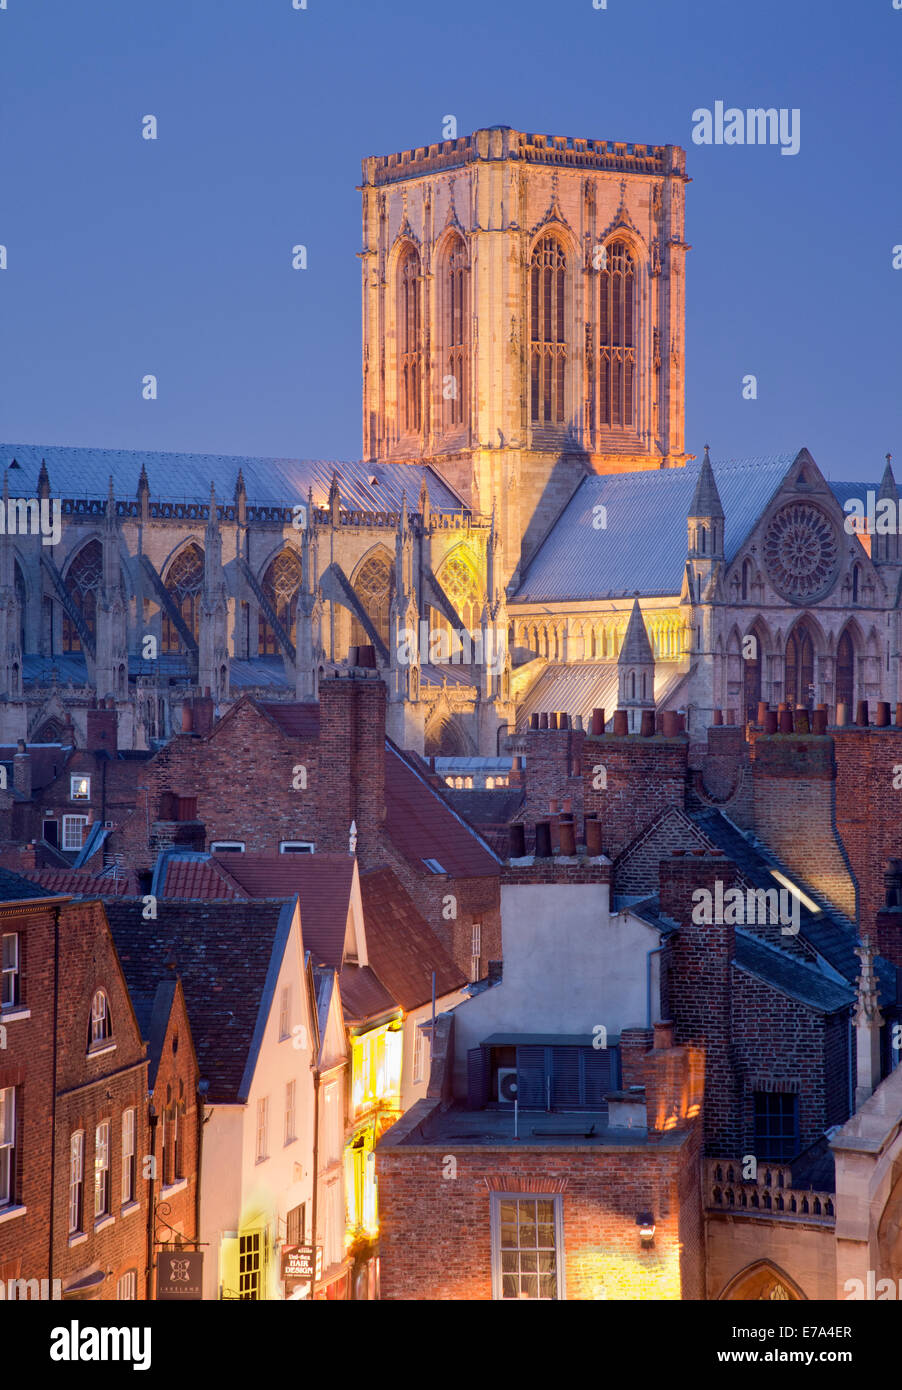 York Minster illuminated at dusk and Stonegate rooftops photographed from the Mansion House roof, in York, England. Stock Photo